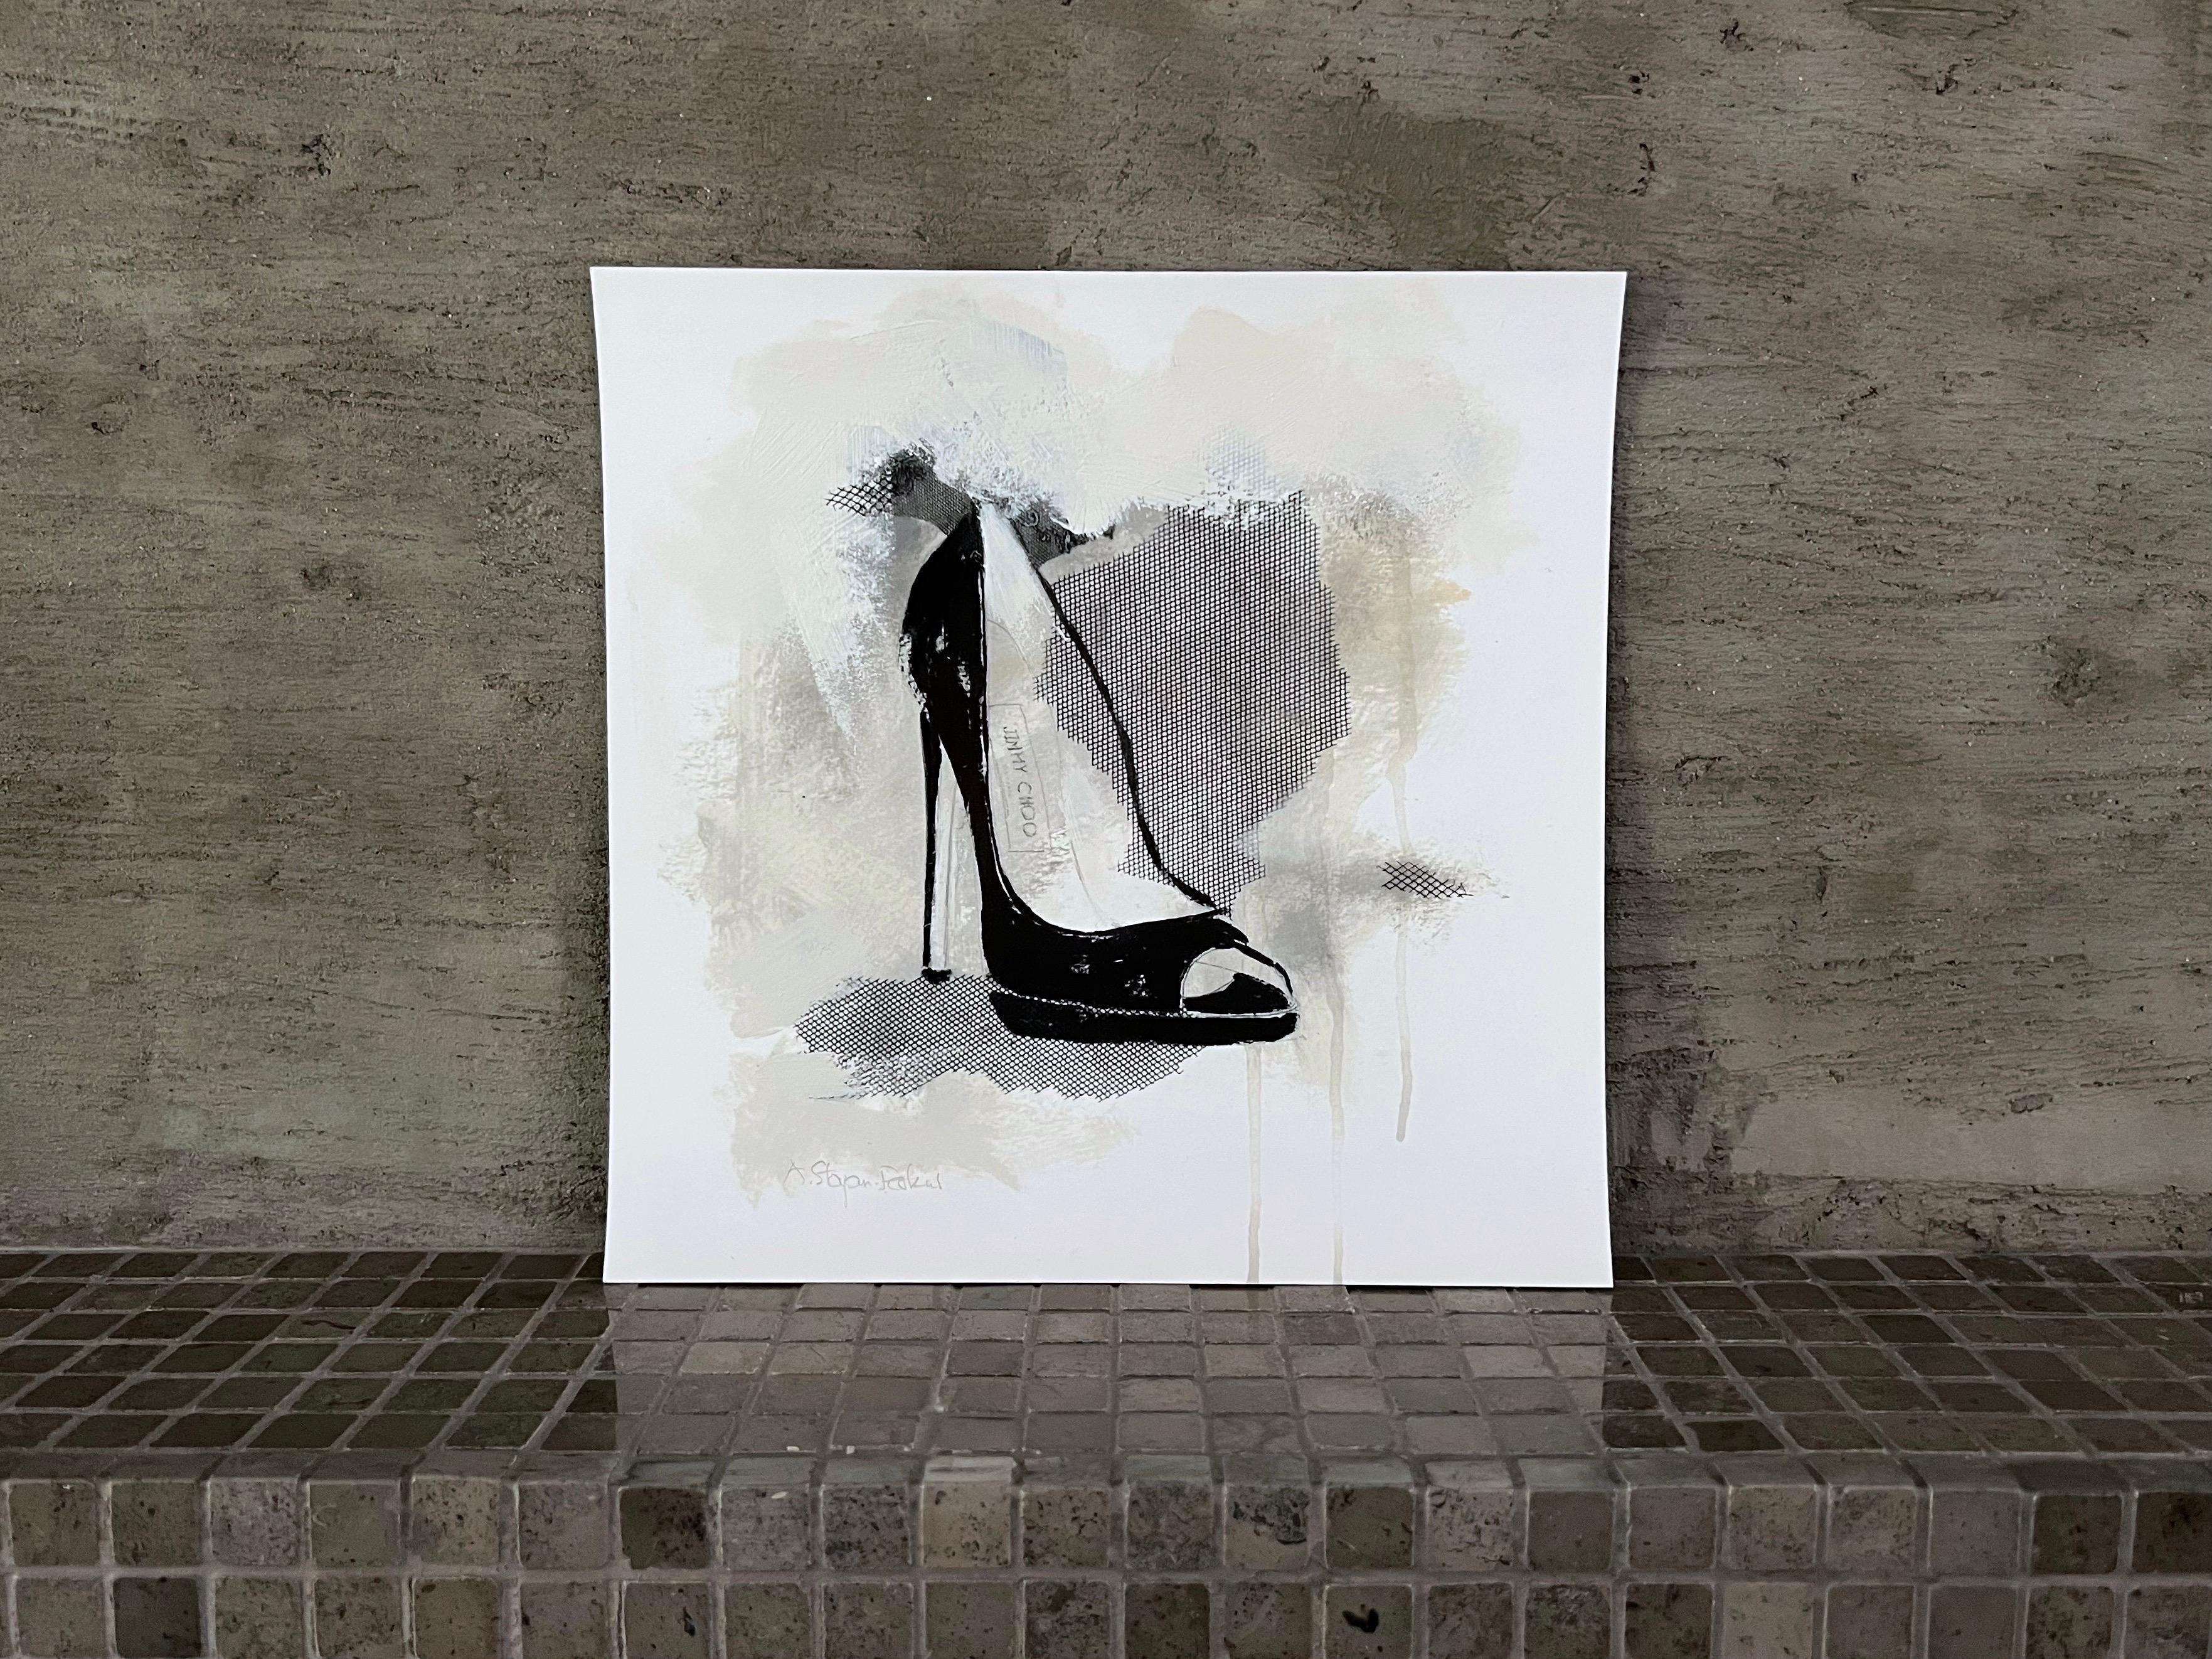 Homage to the iconic Jimmy Choo Luxury Shoe. The fusion of digital and hand painted elements give this artwork distinct character and individuality. The one-of-a-kind Giclée print is a high-quality reproduction of an original artwork, printed on